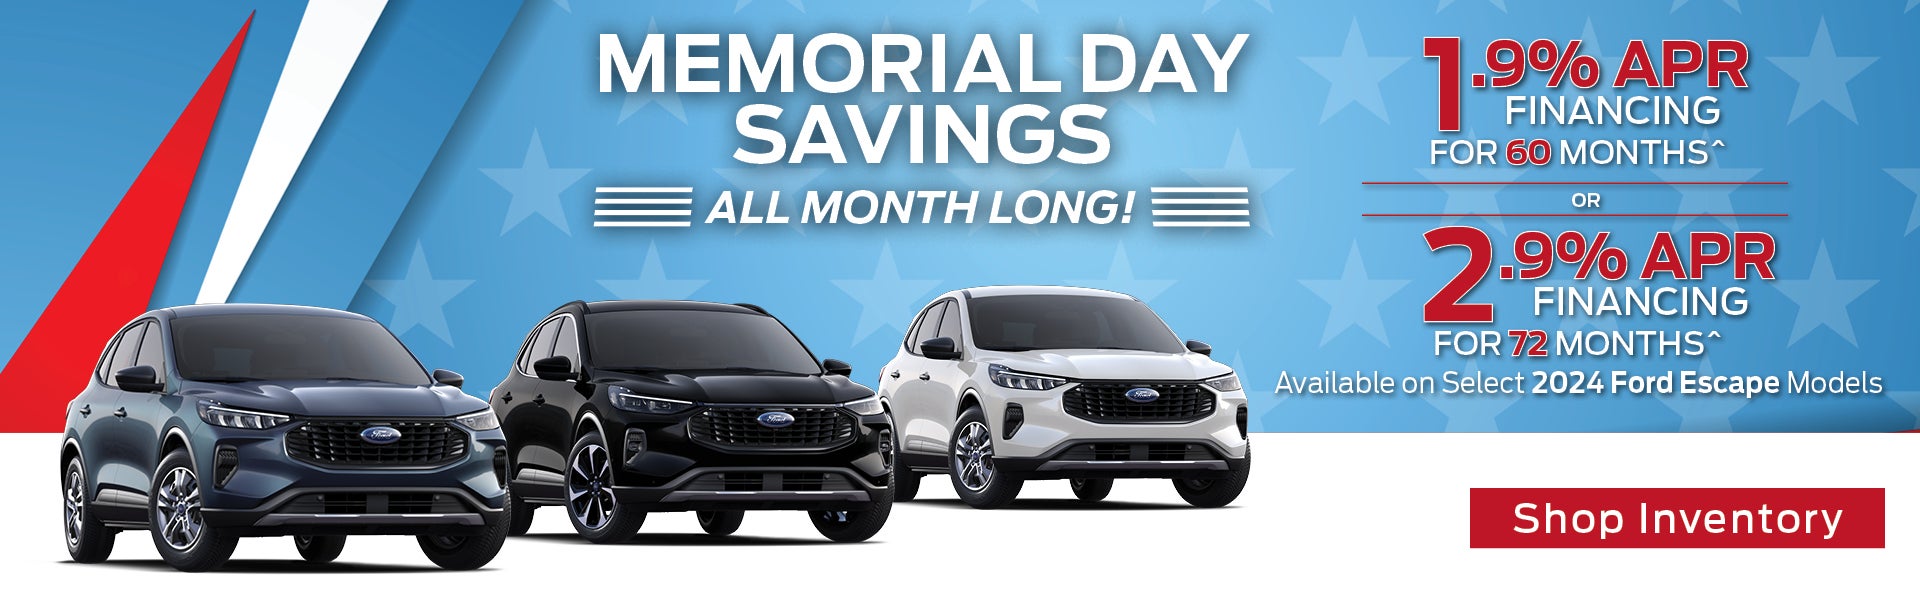 1.9% APR Financing for 60 months OR 2.9% APR Financing for 7